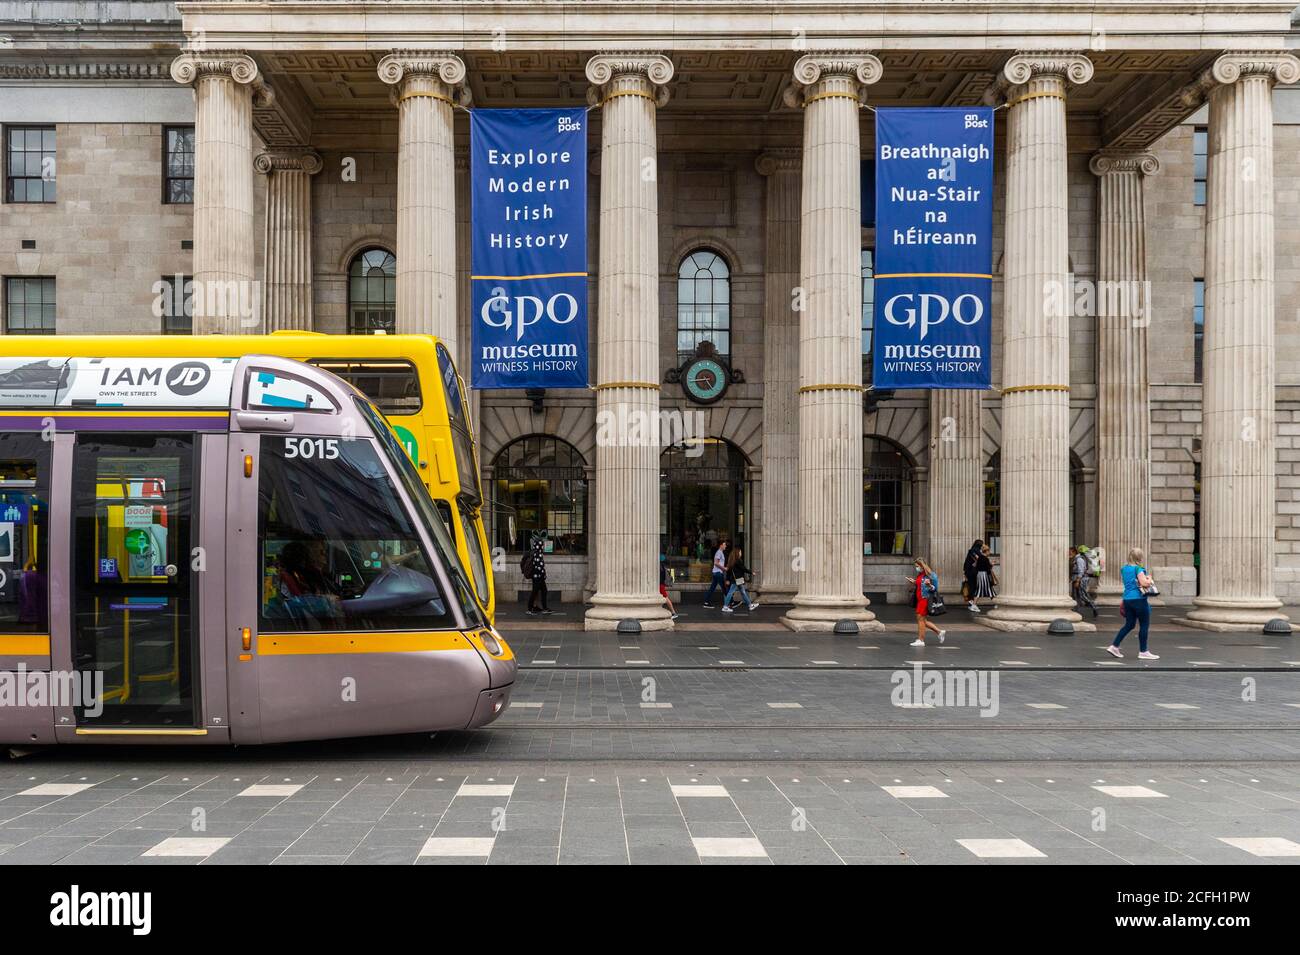 Luas Tram à l'GPO, O'Connell Street, Dublin, Irlande. Banque D'Images